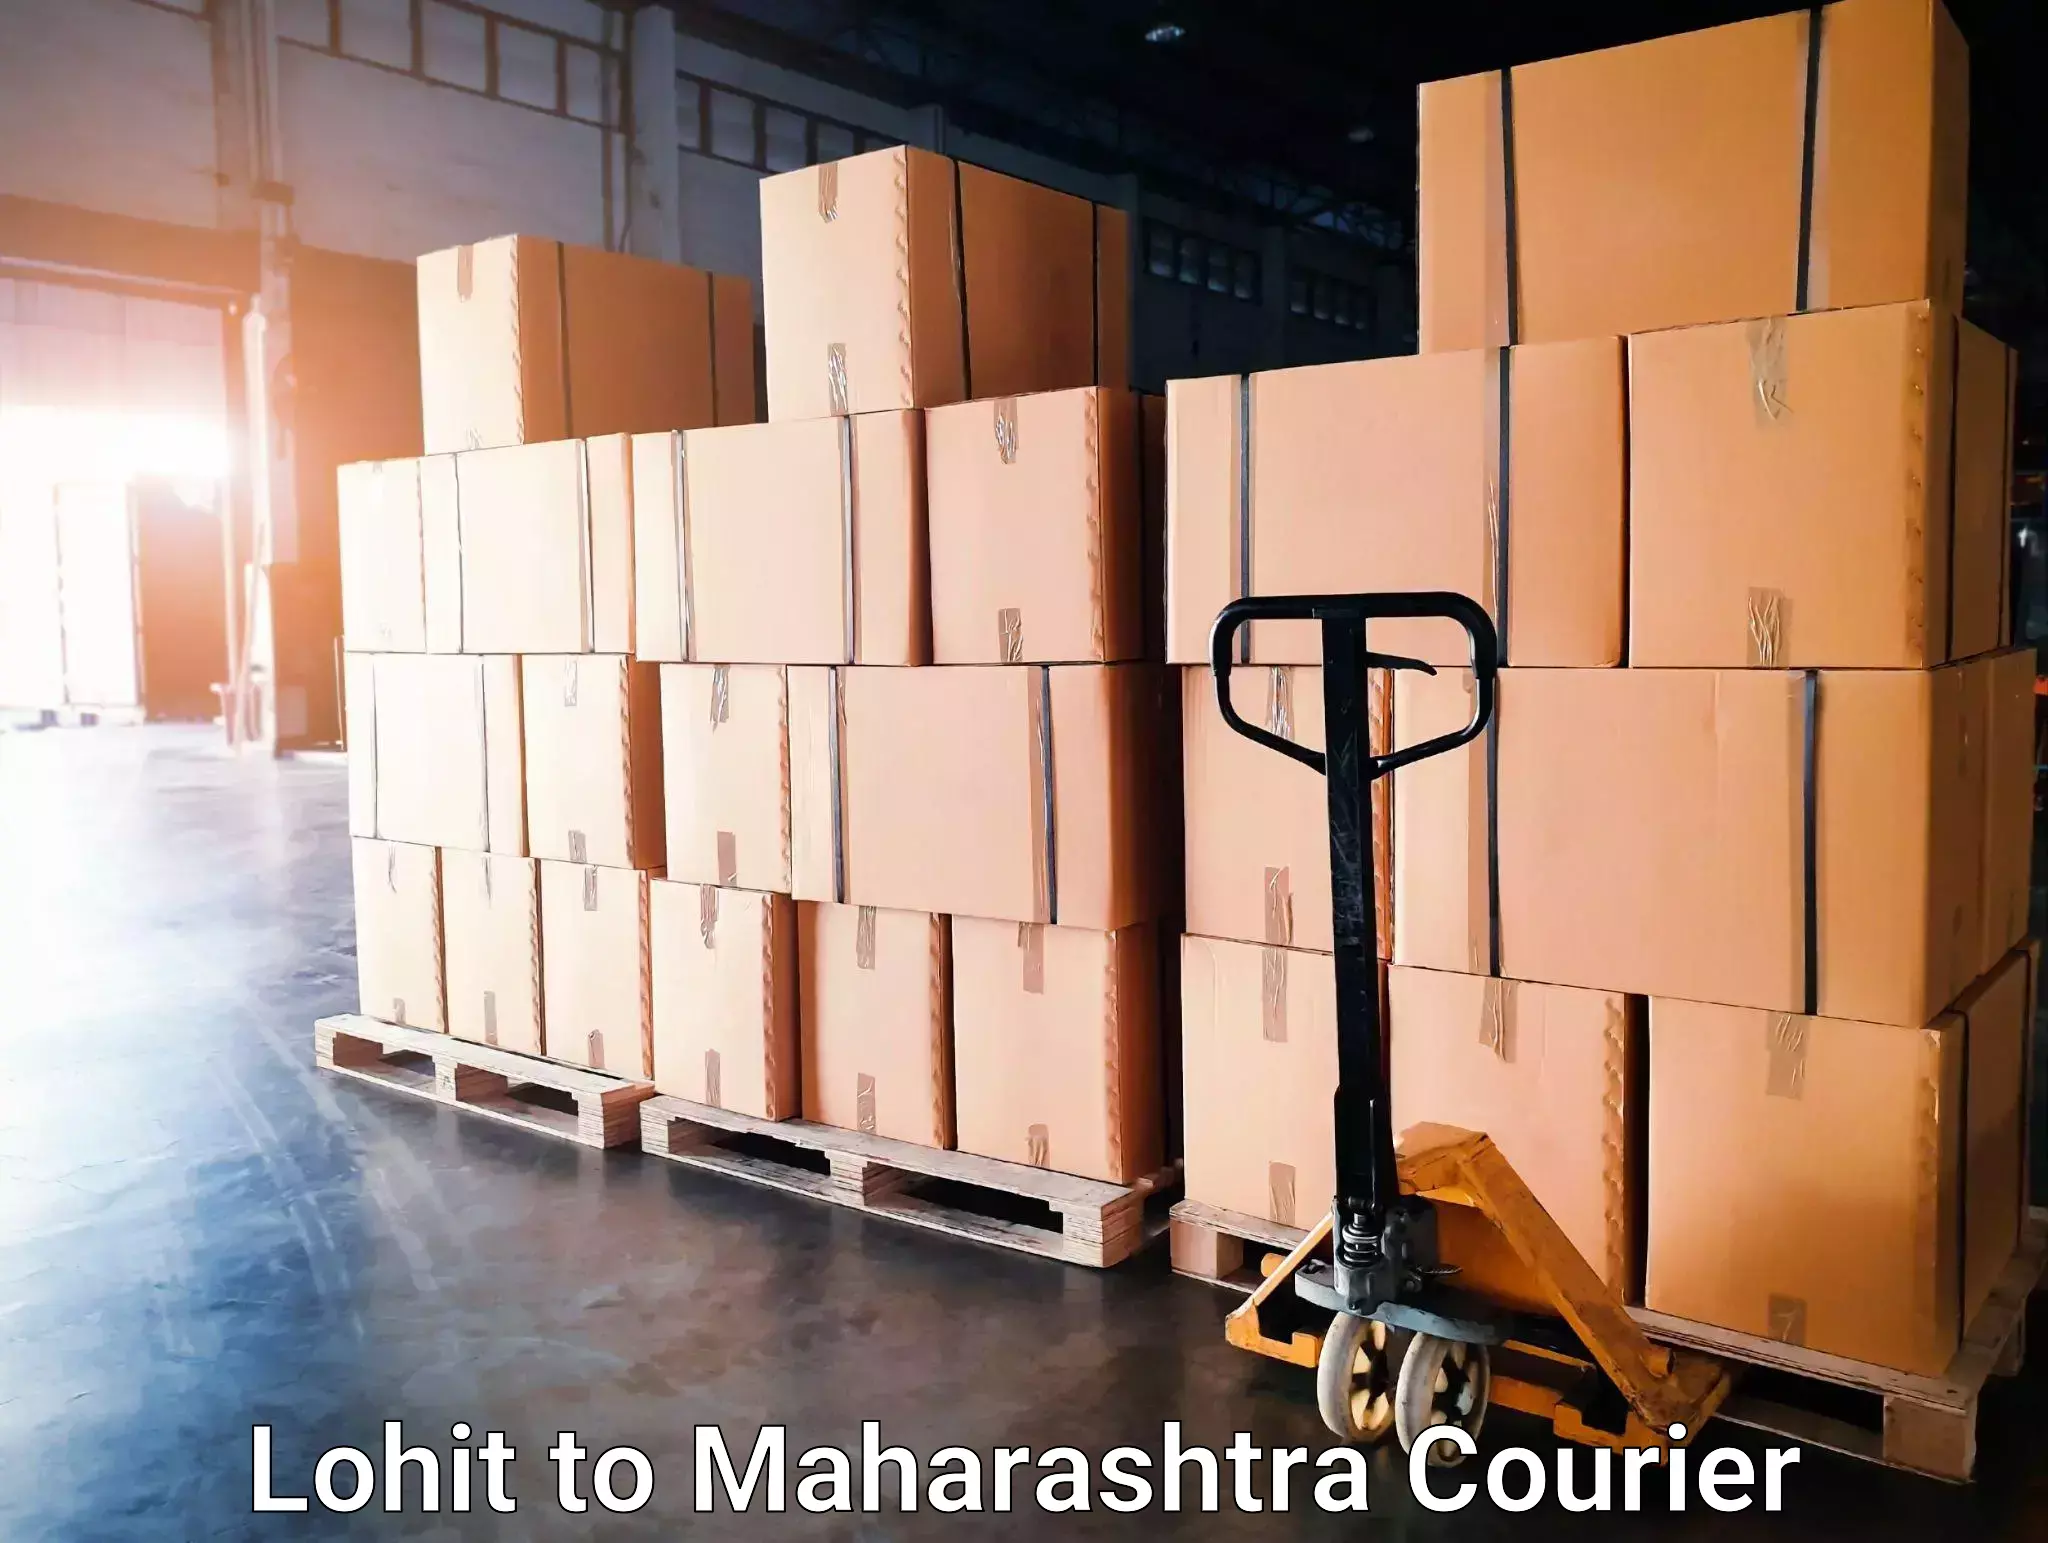 Courier service partnerships Lohit to Newasa